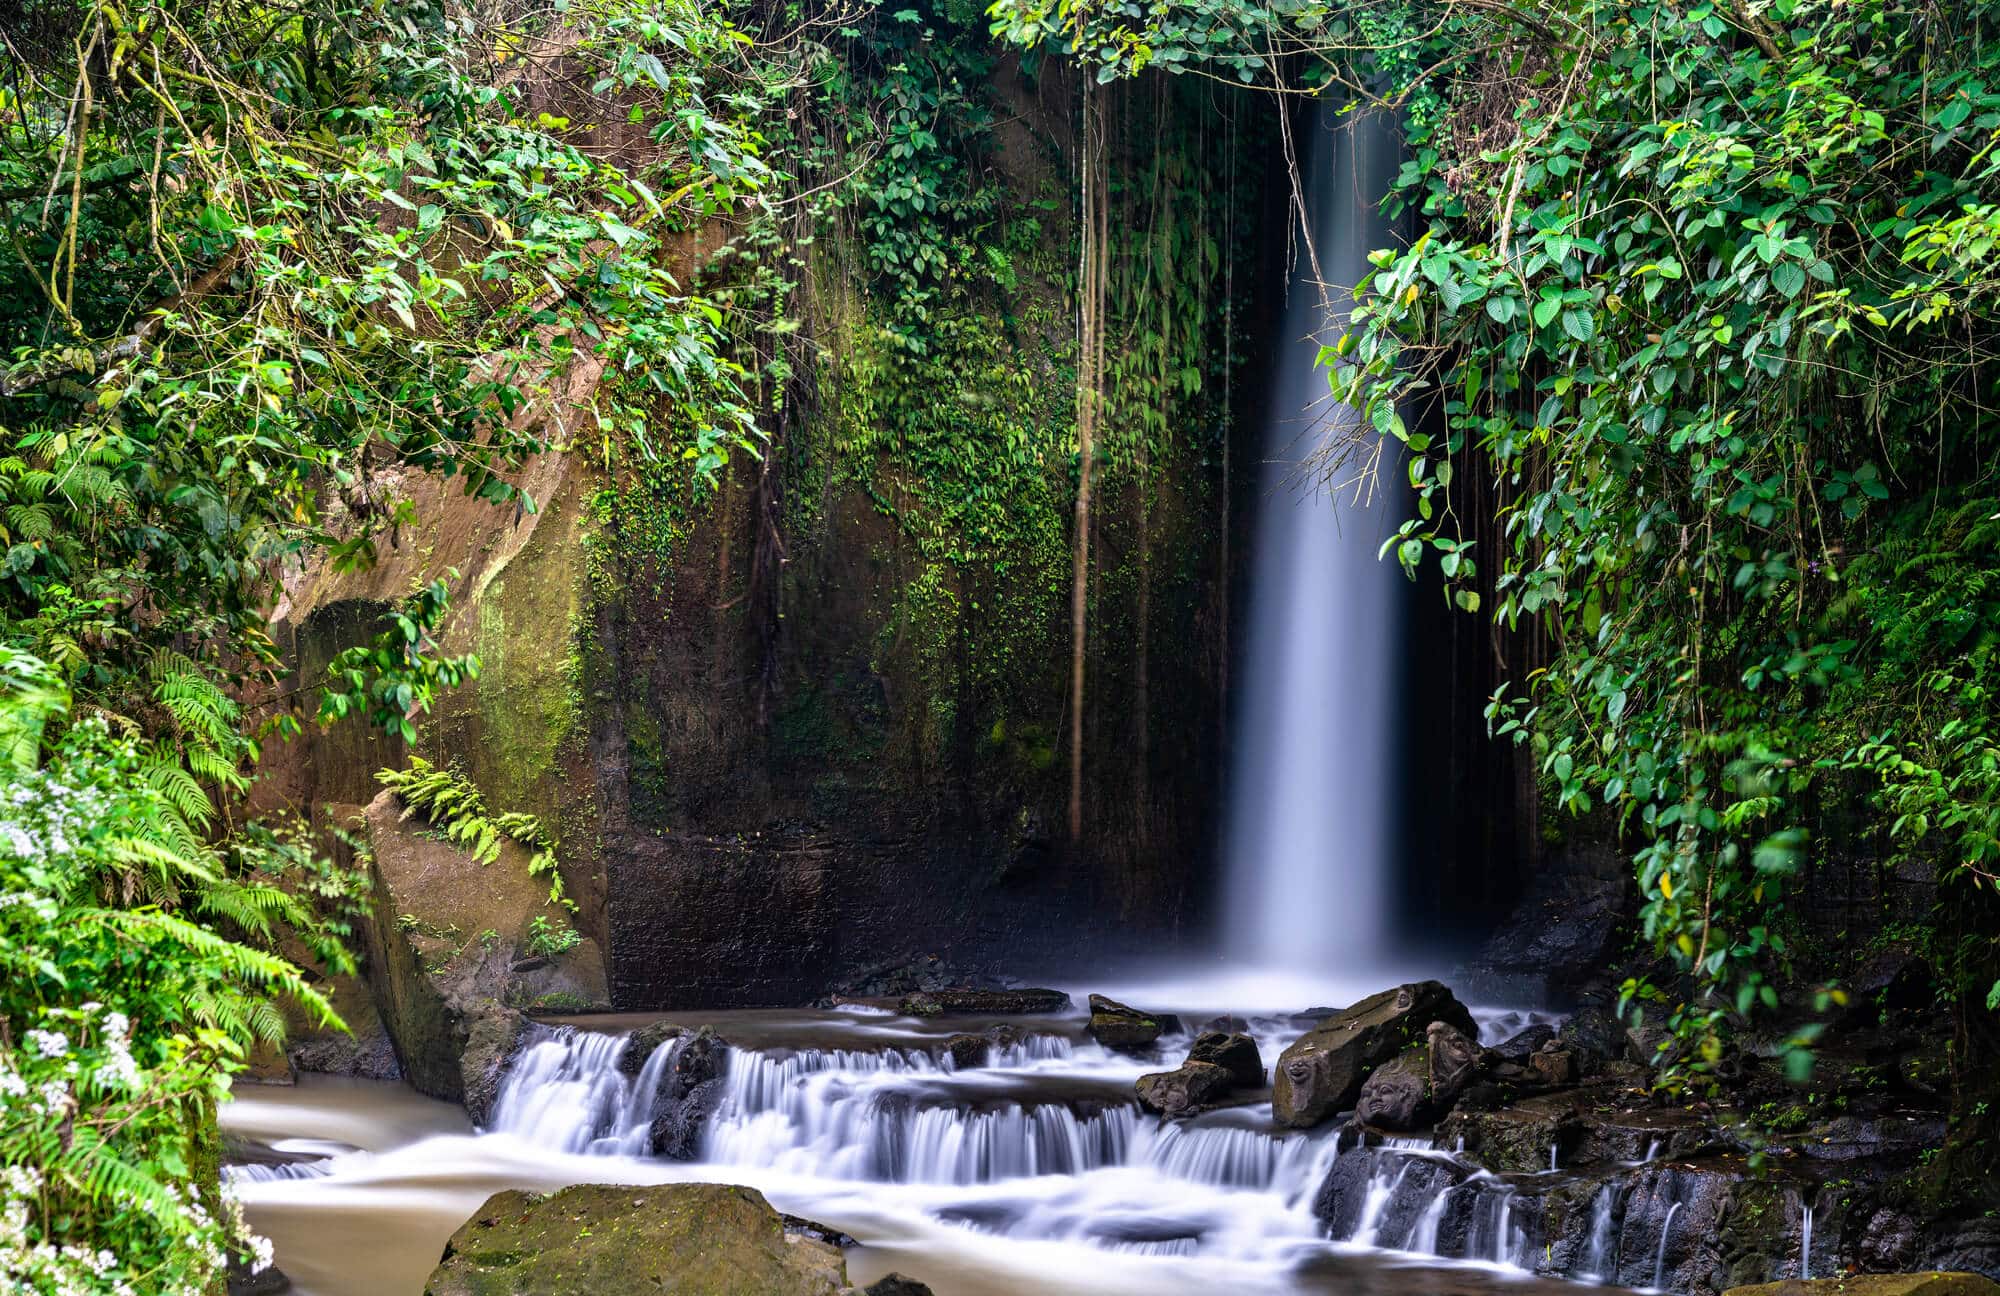 A guide to all the best waterfalls in Ubud Bali - Sumampan Waterfall